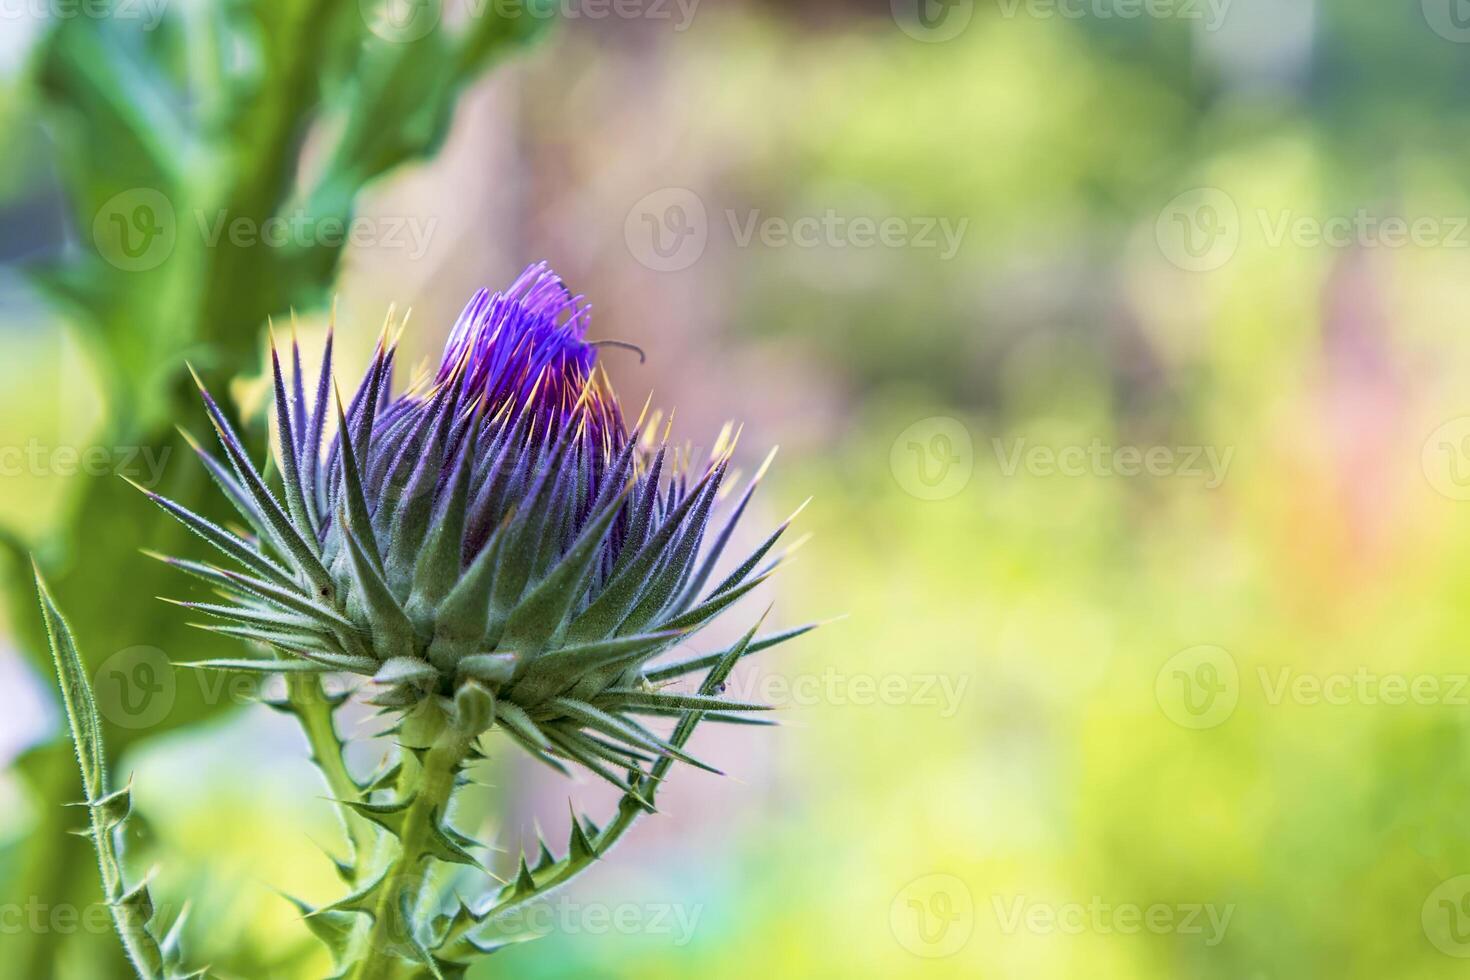 Wild-growing thistle on green blurred background. Onopordum acanthium photo